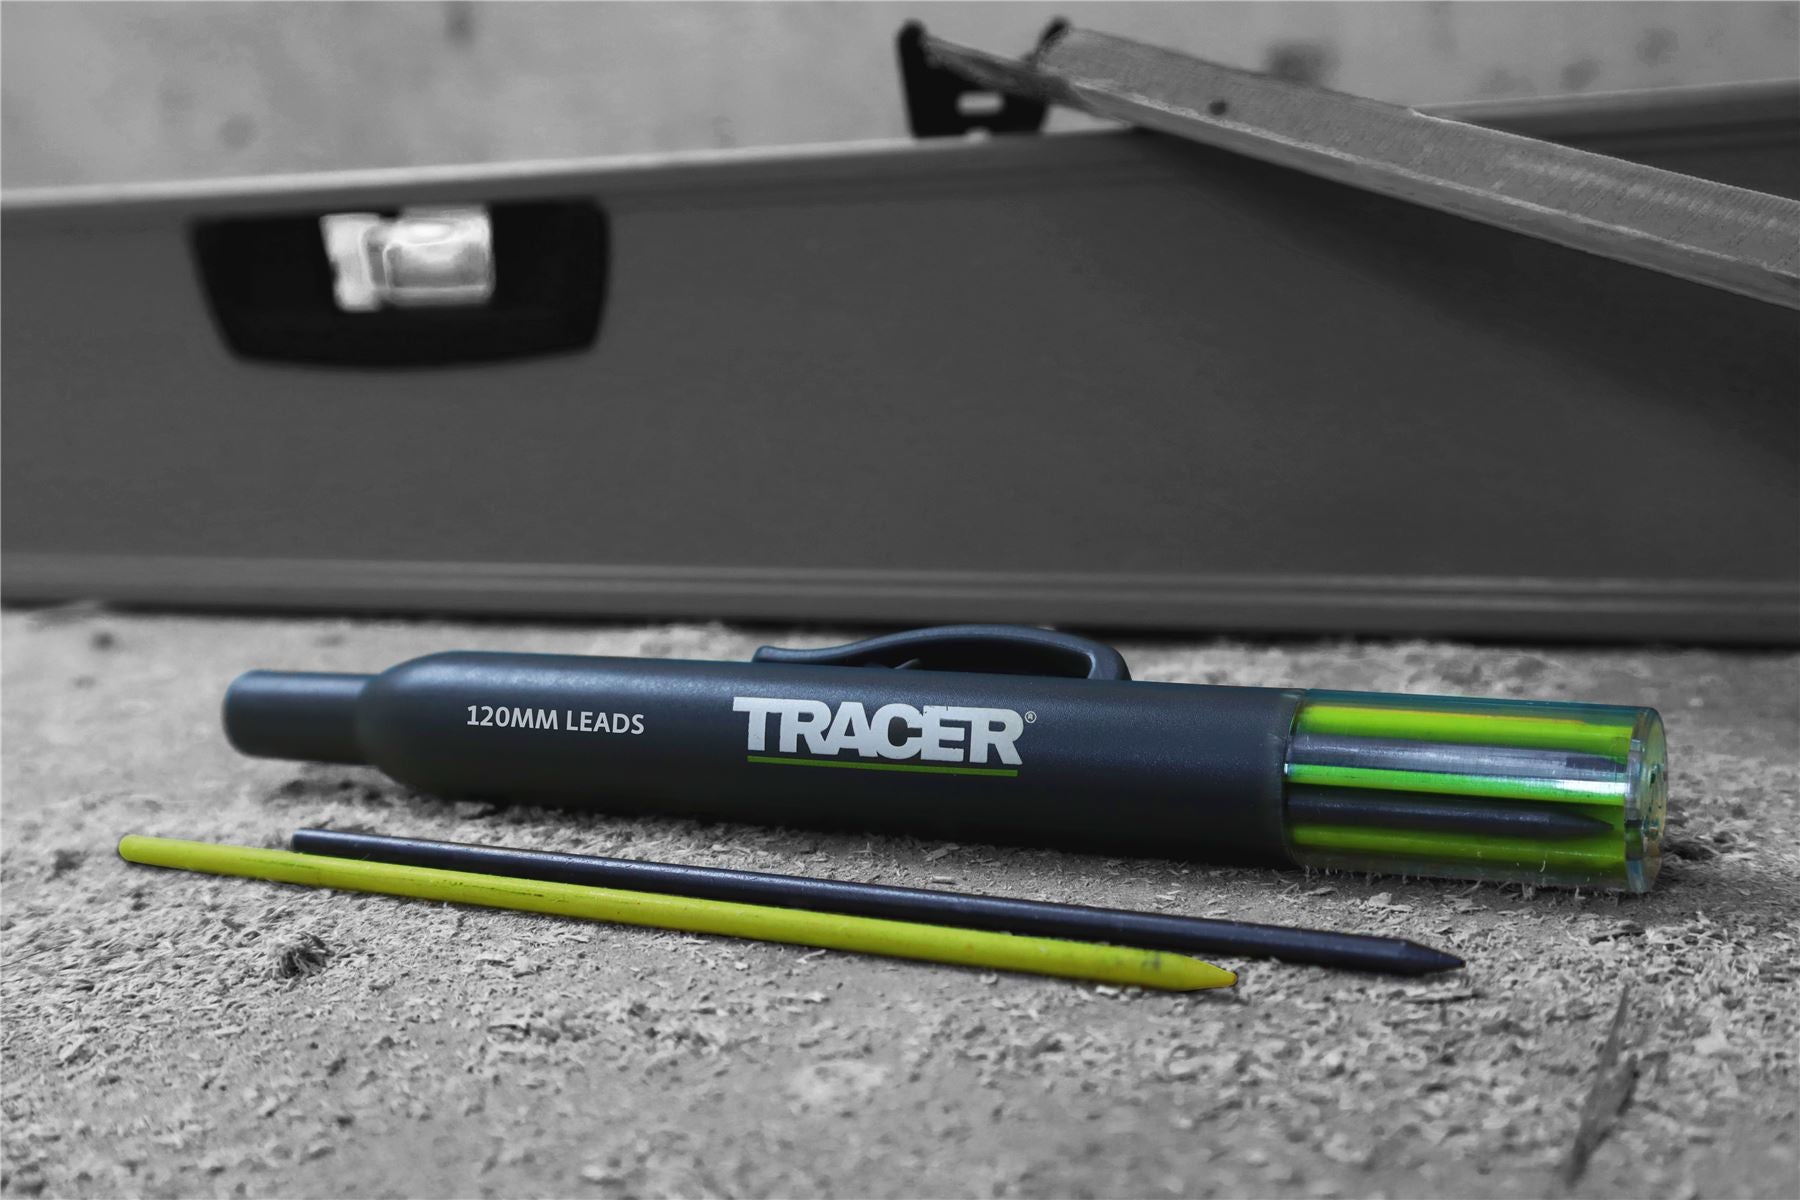 TRACER Deep Hole Pencil Marker with ALH1 6 Replacement Leads with Site Holster